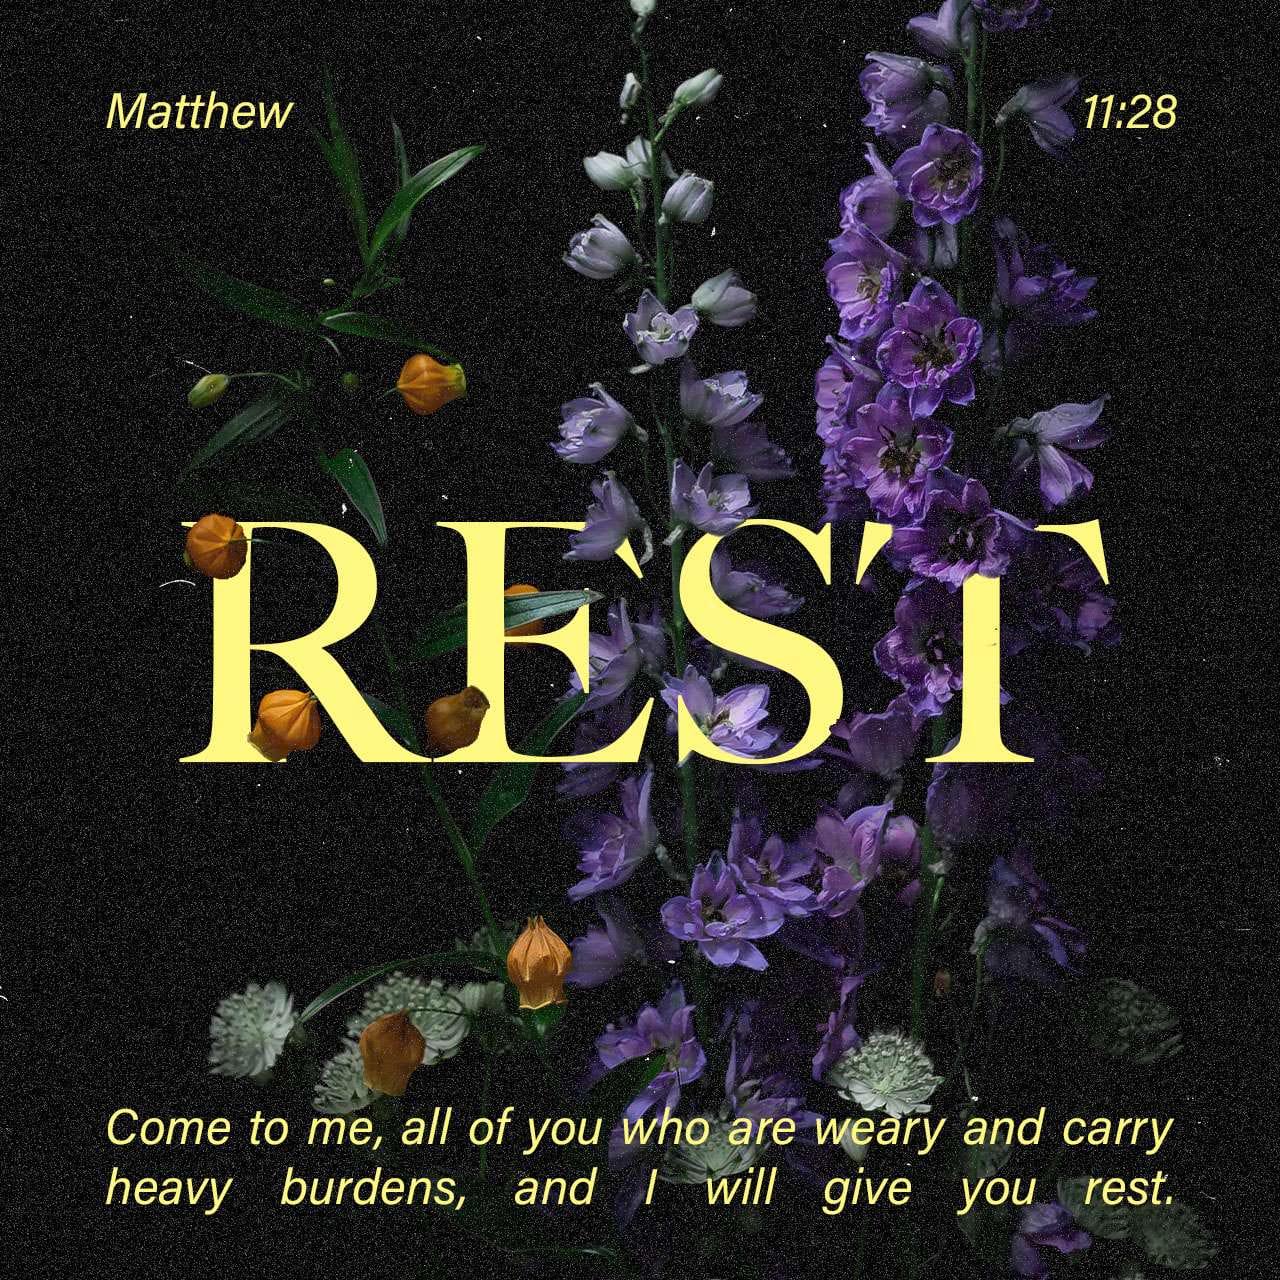 Matthew 11:28 “Come to Me, all who are weary and heavy-laden, and I ...